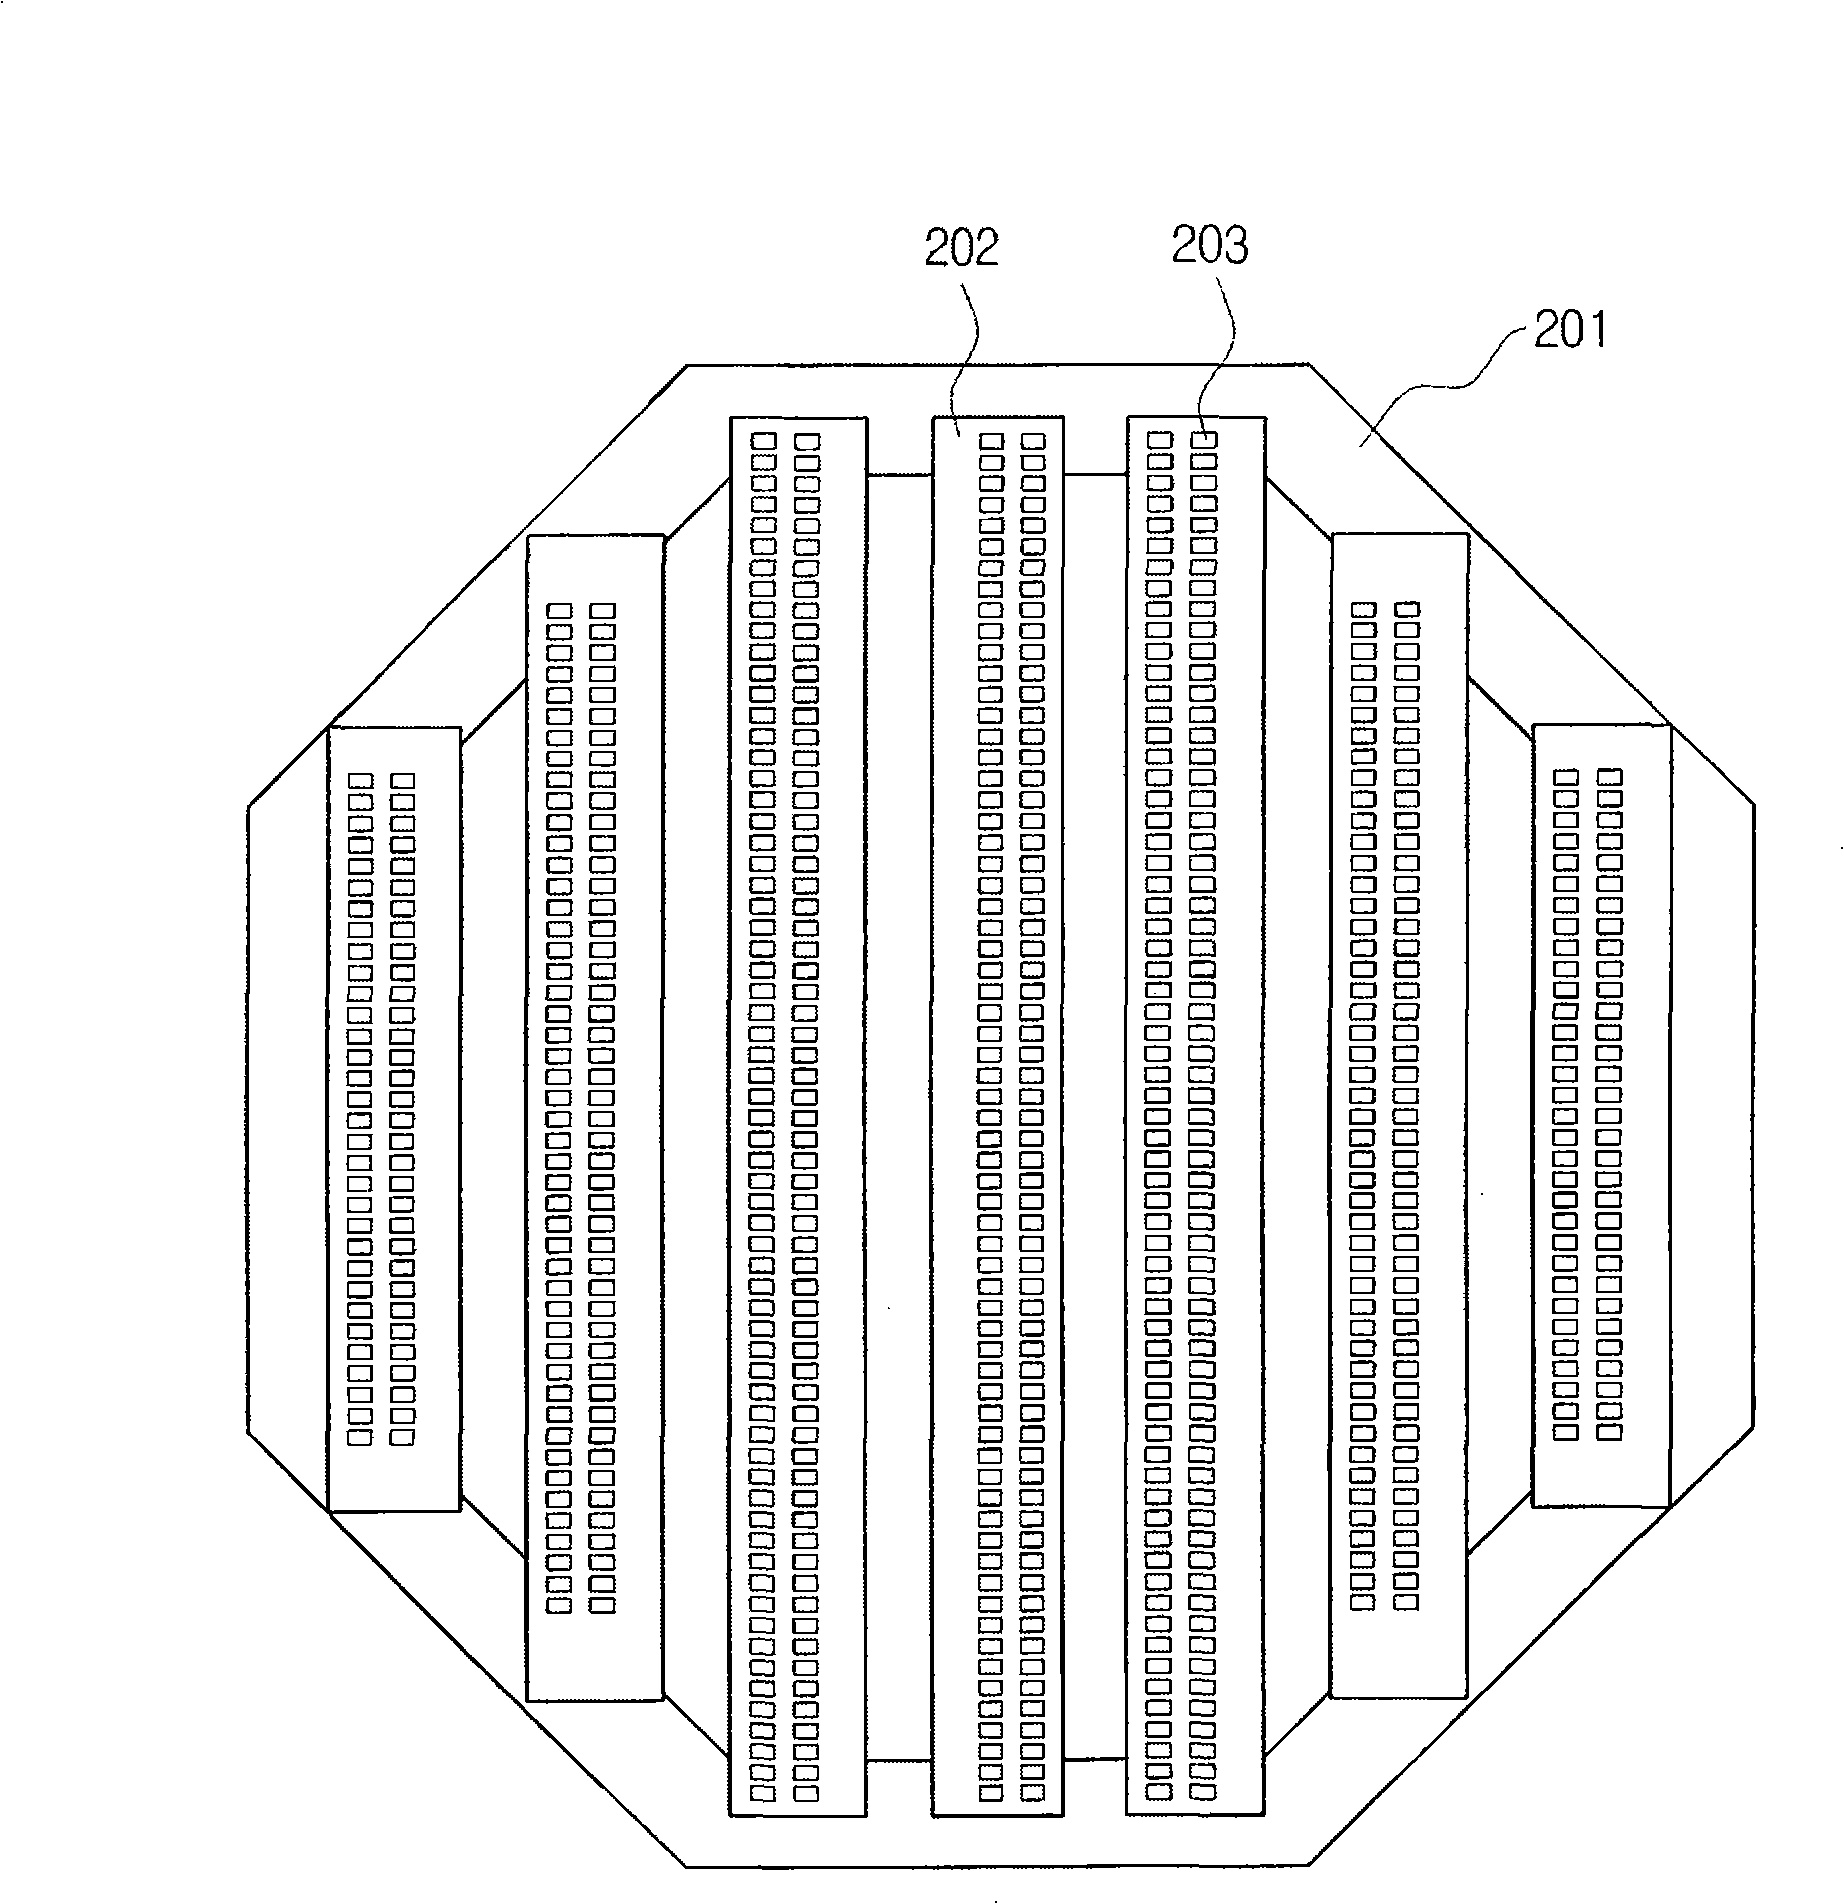 Probe card and method for fabricating the same